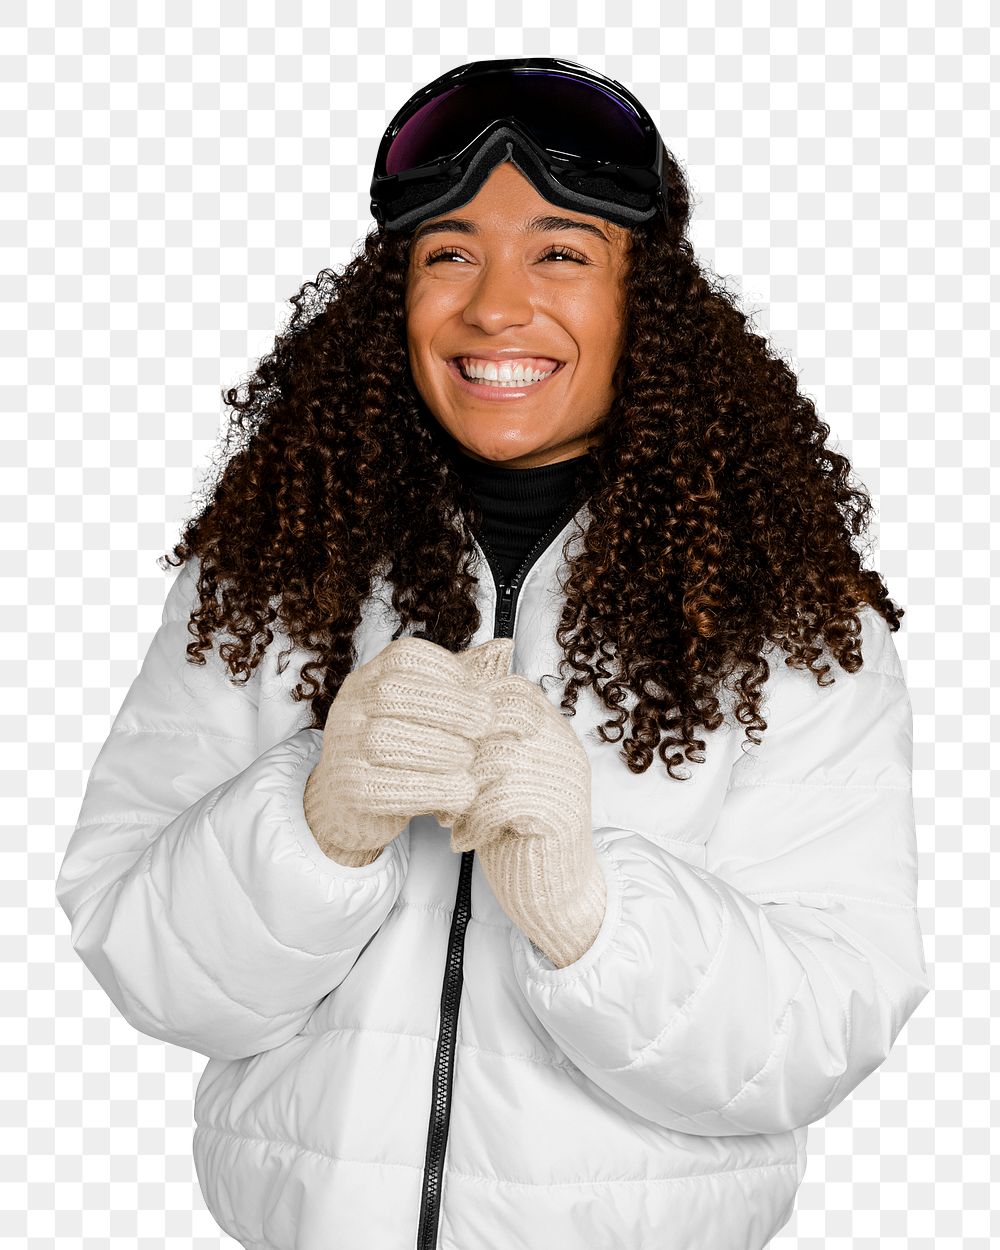 Women's winter outfit png sticker, transparent background